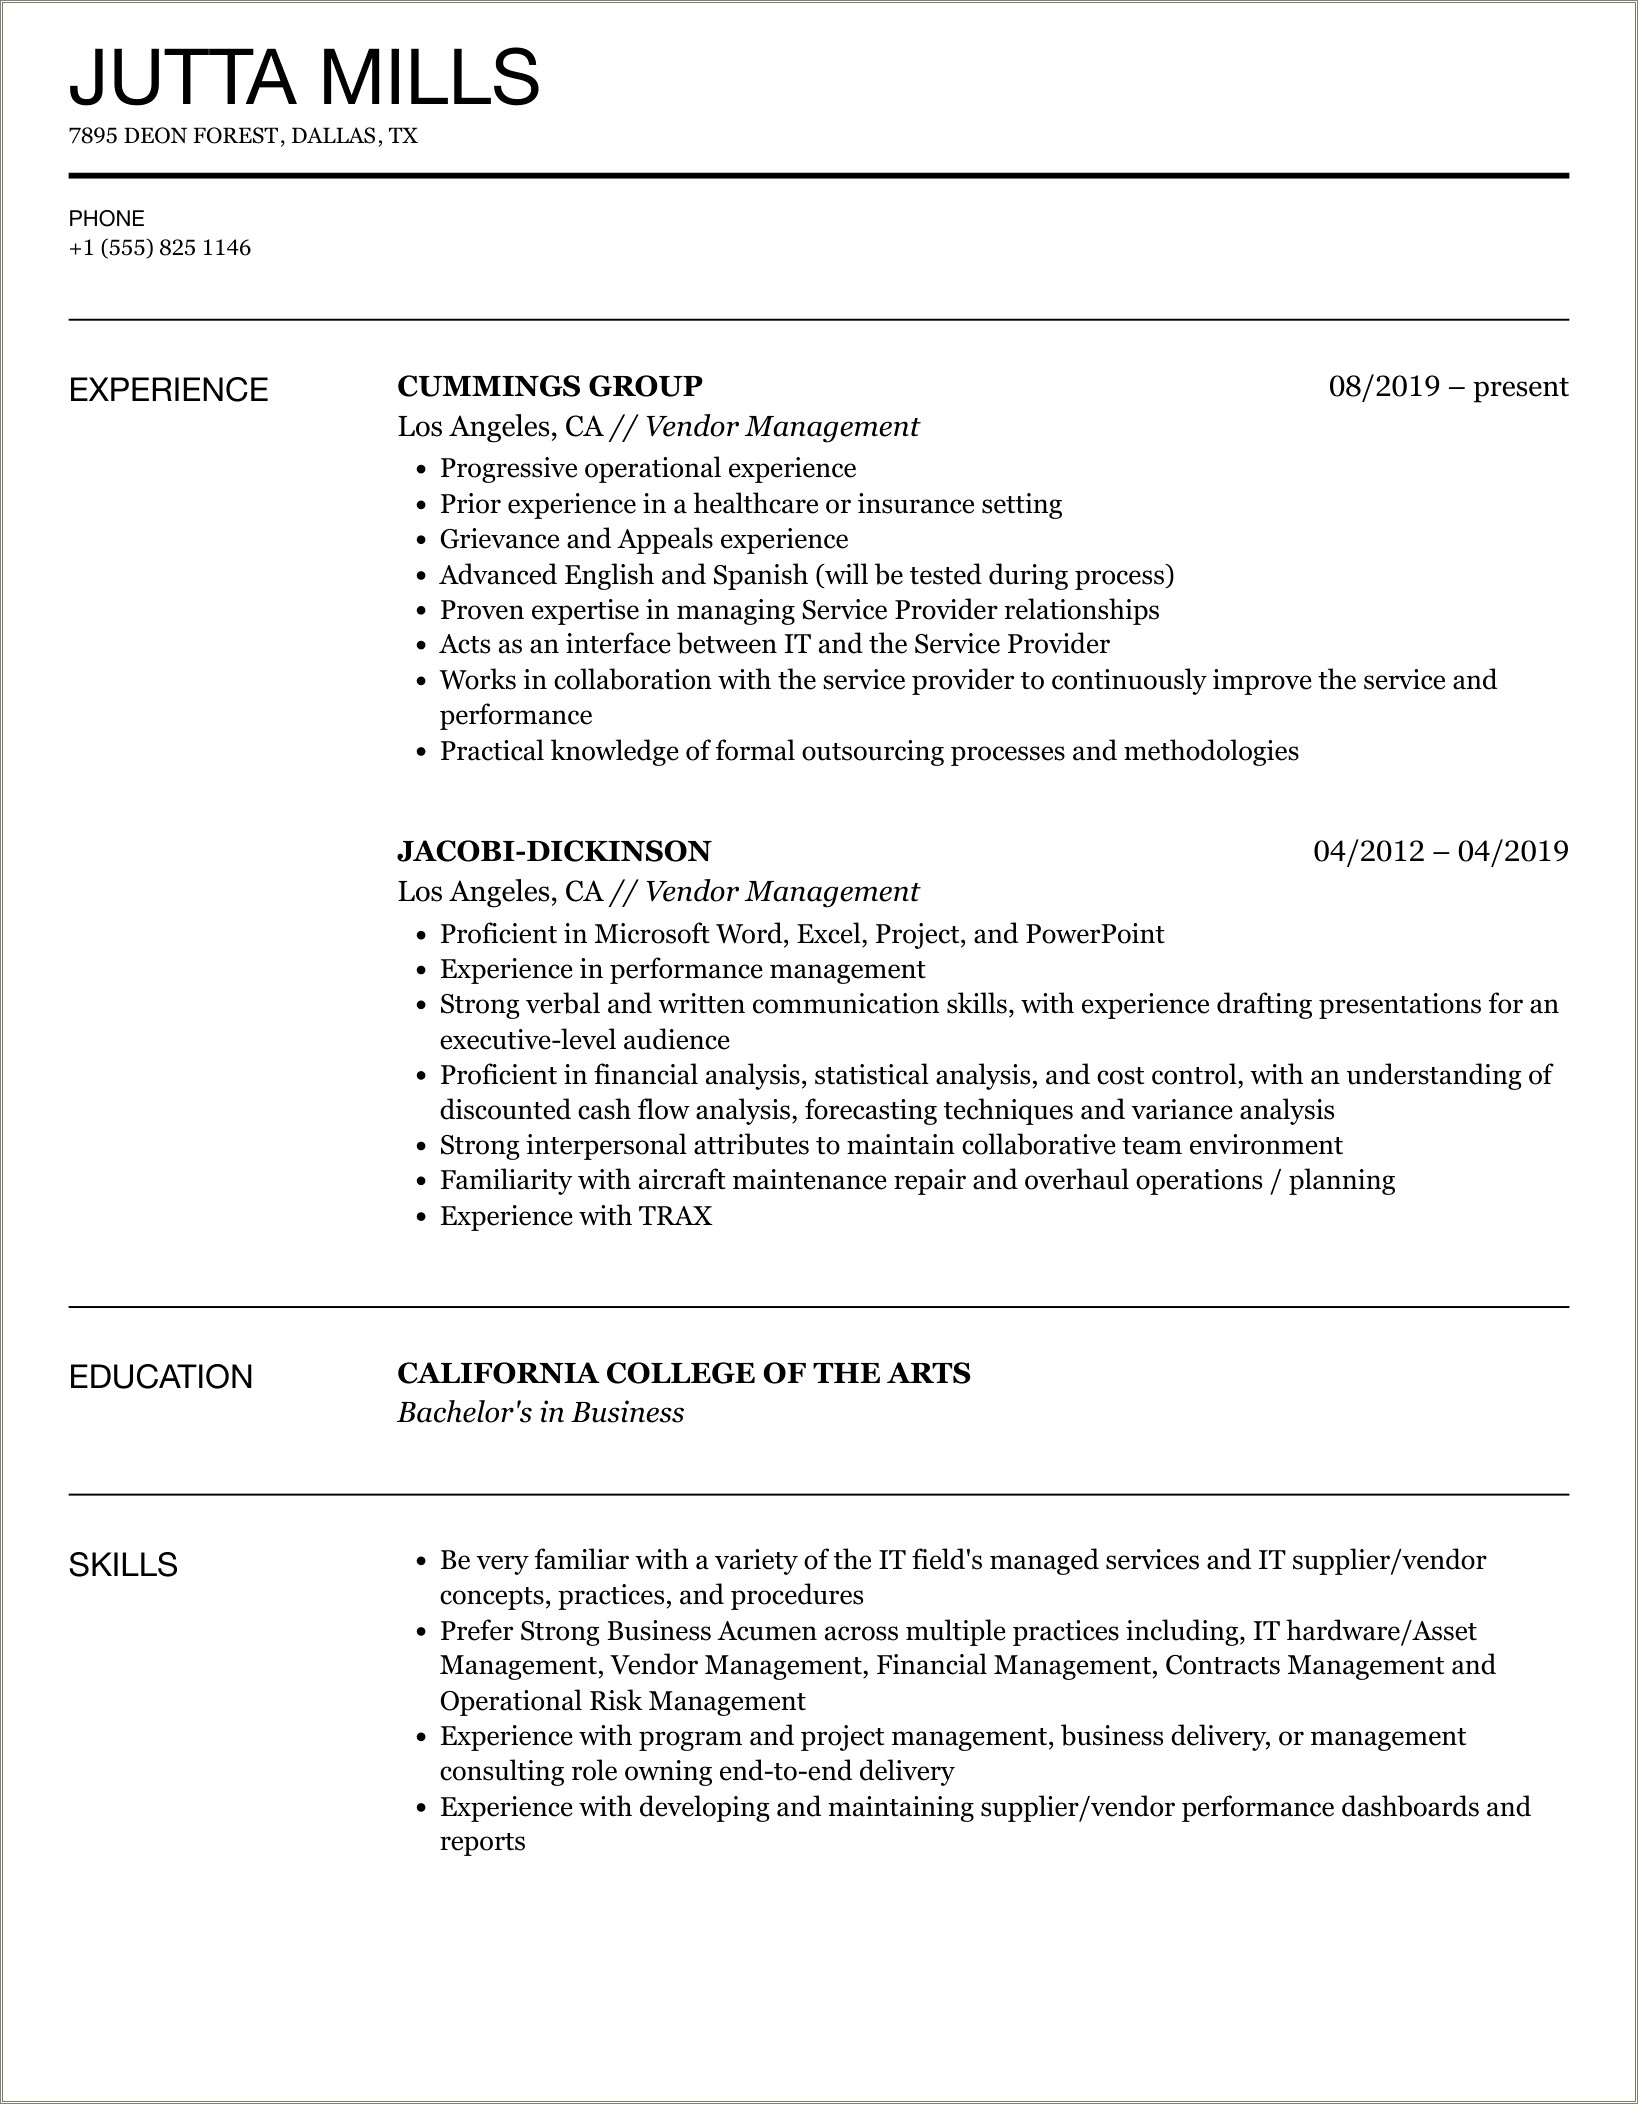 Contract Work Vs Self Employed In Resume